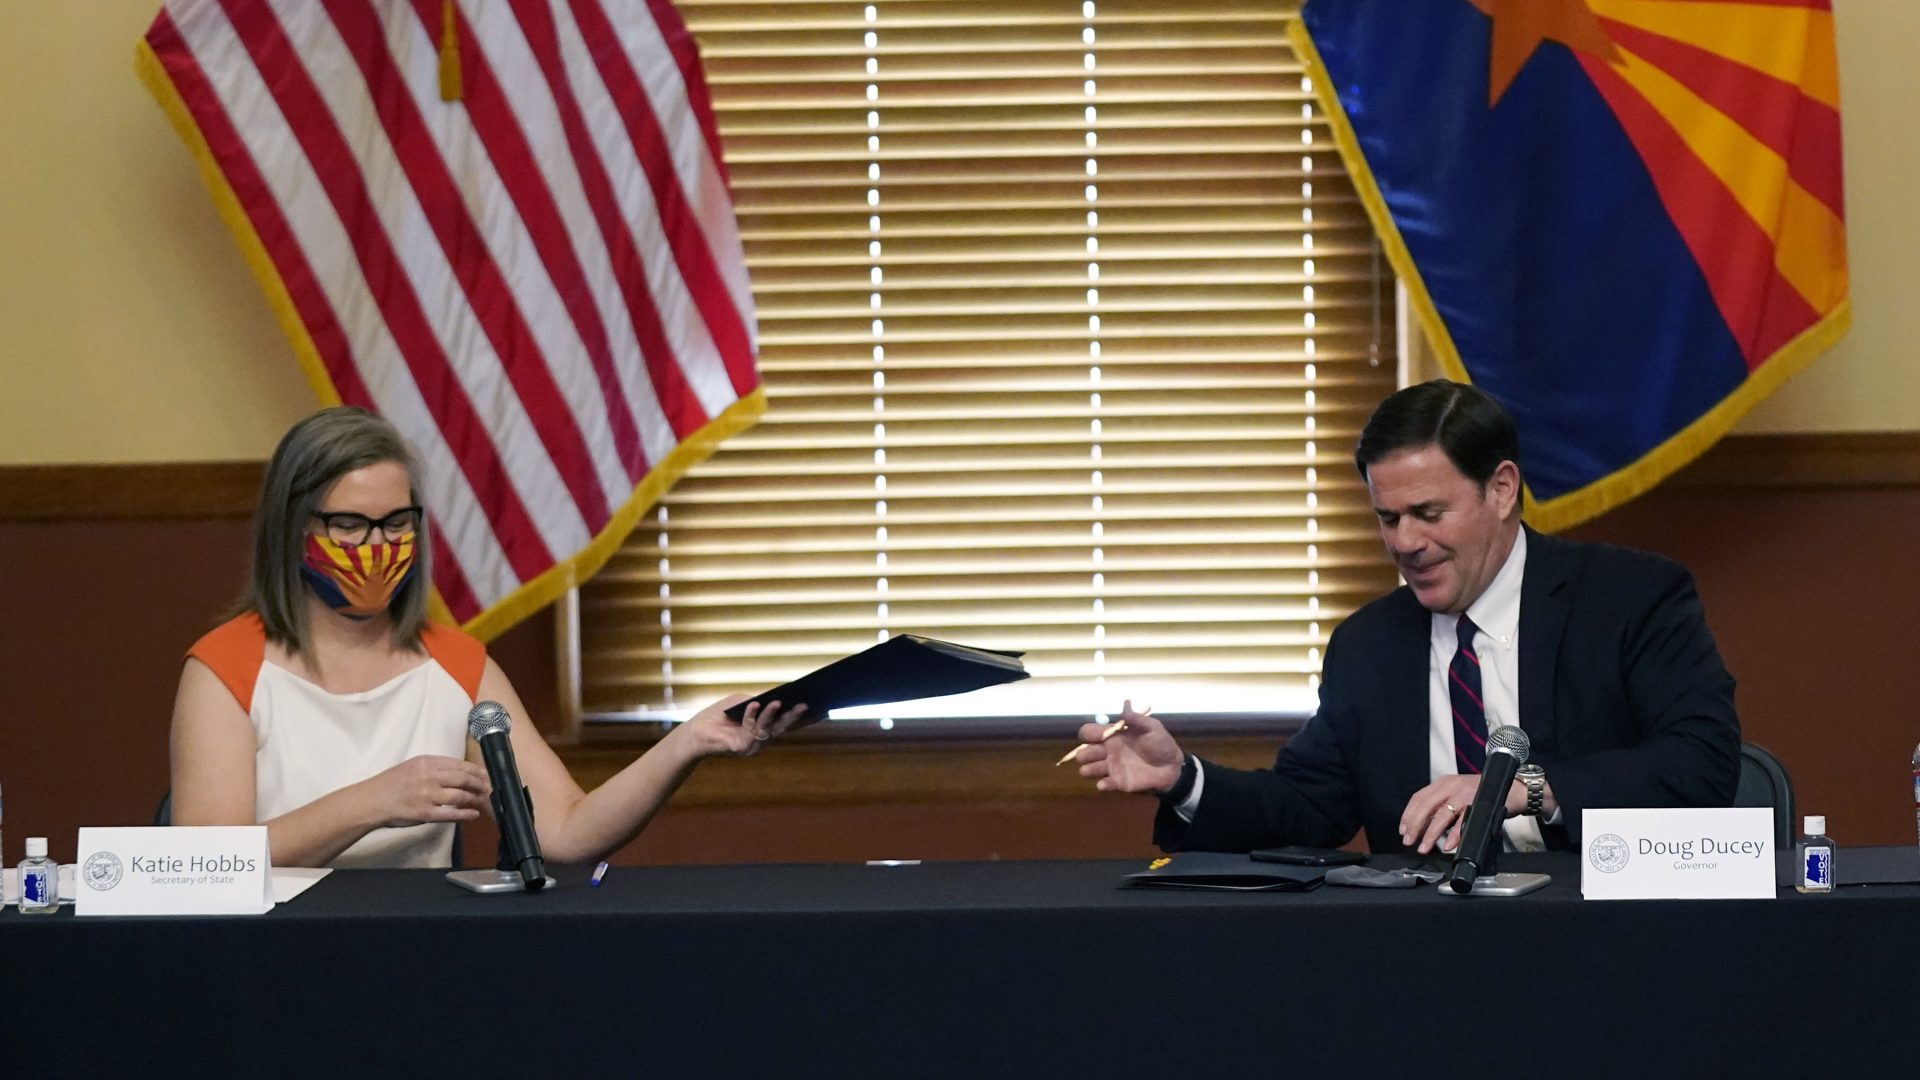 Arizona Secretary of State Katie Hobbs, left, and Arizona Gov. Doug Ducey exchange election documents to sign to certify the election results for federal, statewide, and legislative offices and statewide ballot measures at the official canvass at the Arizona Capitol Monday, Nov. 30, 2020, in Phoenix. (AP Photo/Ross D. Franklin, Pool)